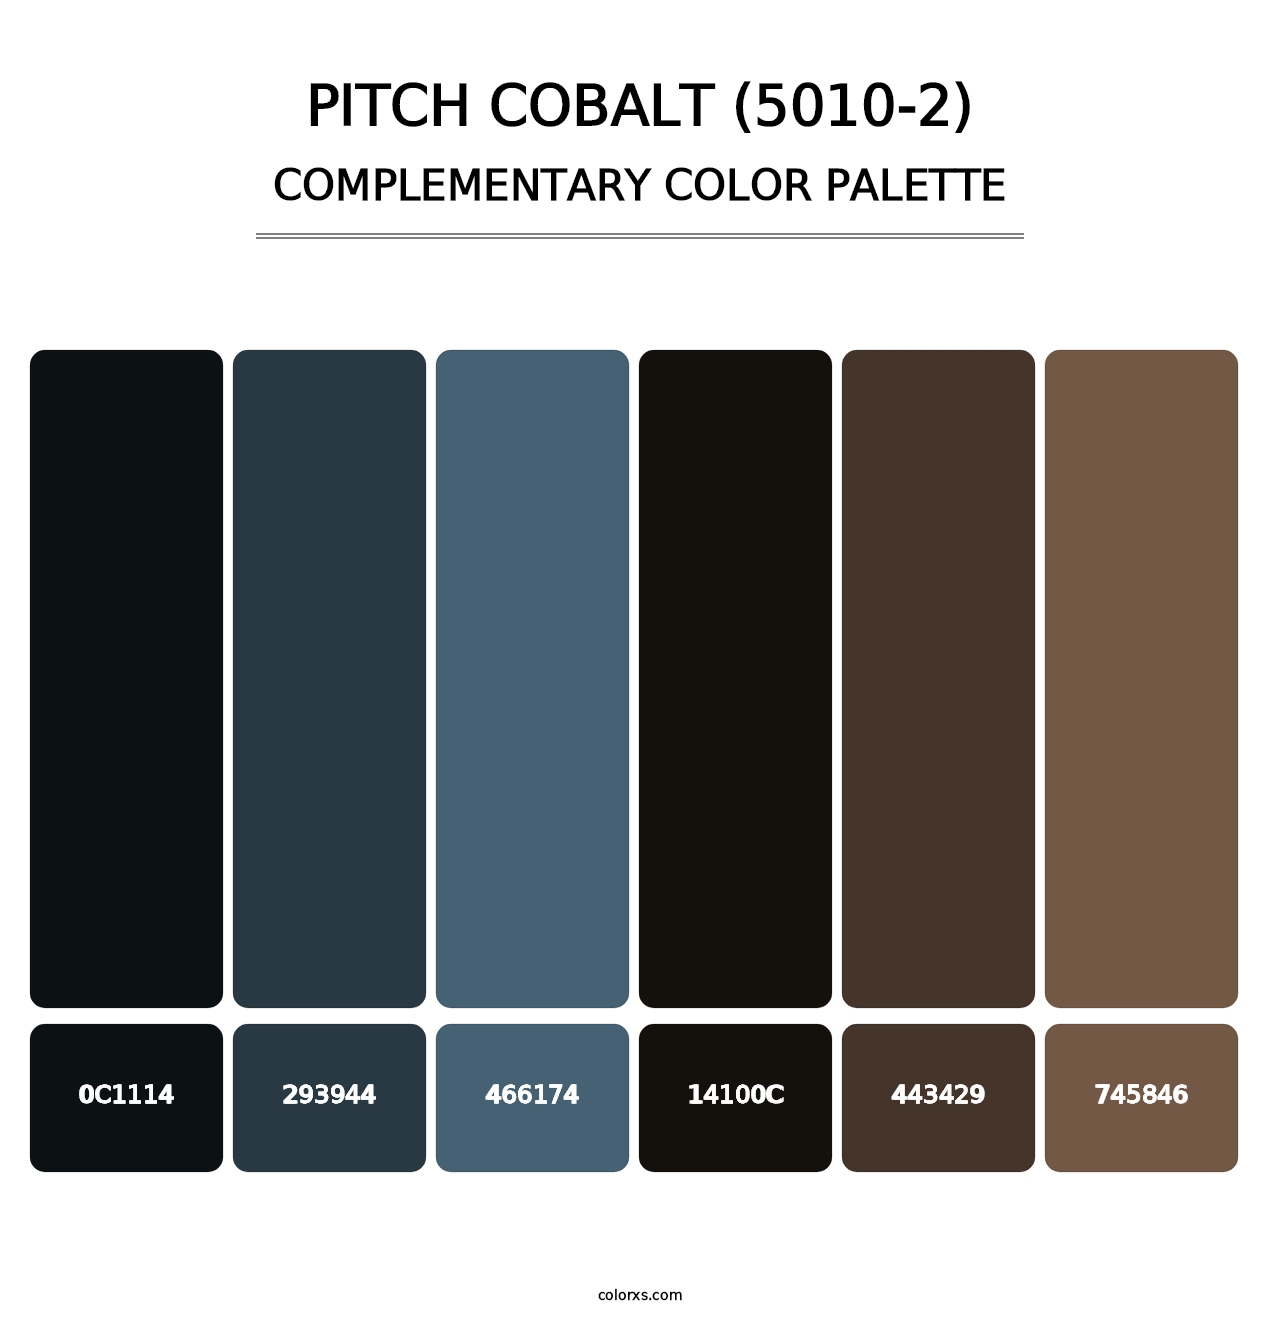 Pitch Cobalt (5010-2) - Complementary Color Palette